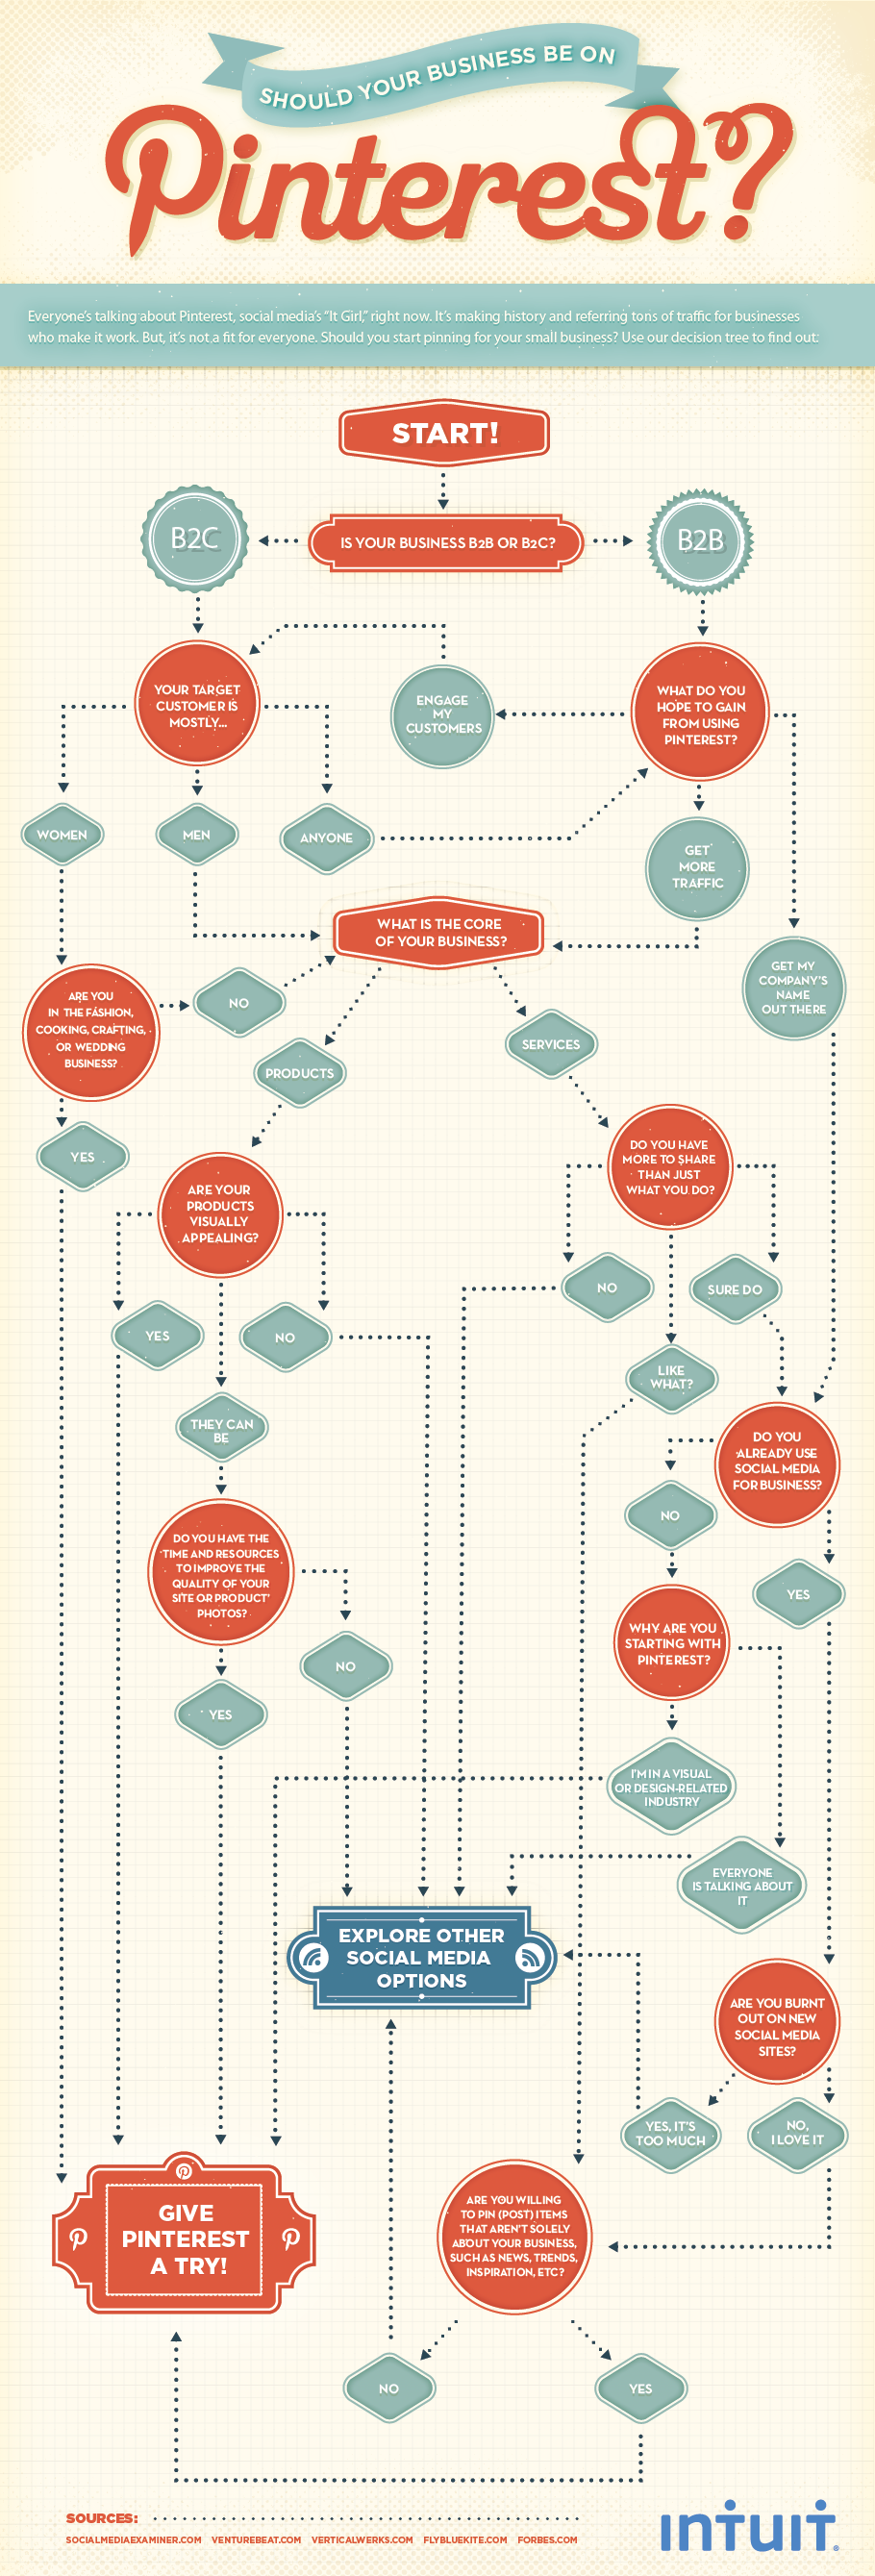 Should I Use Pinterest for My Business? Infographic by GuavaBox